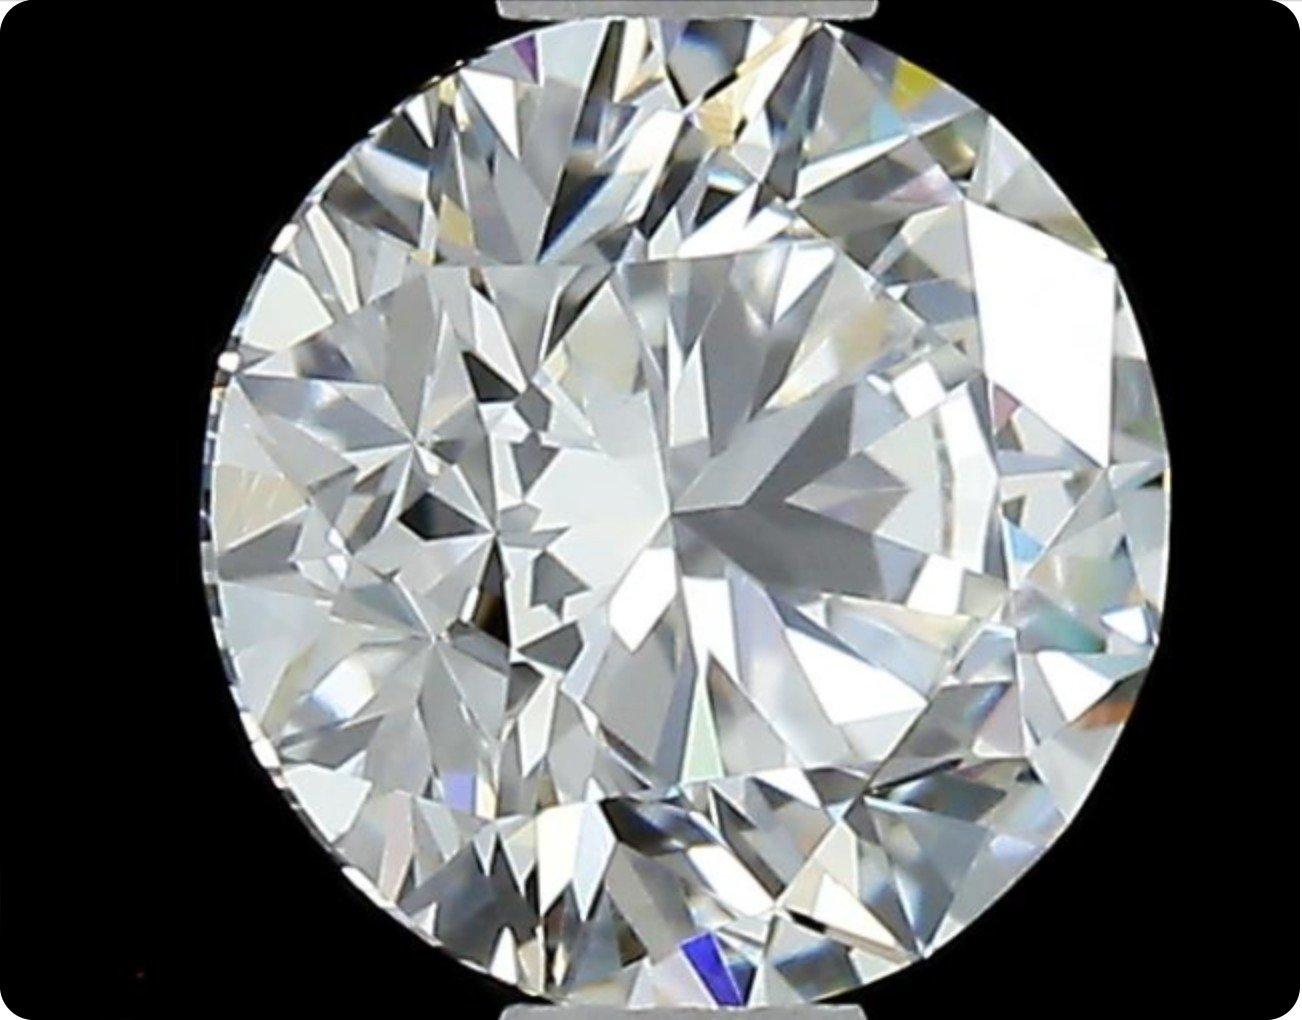 Two natural round brilliant diamond in a 0.82 total carats G VS2 with beautiful cut and shine. These diamonds comes with an GIA Certificate and laser inscription number.

SKU: DSPV-166661-62 & DSPV-166661-53

GIA 5136312596 & 2126990475

